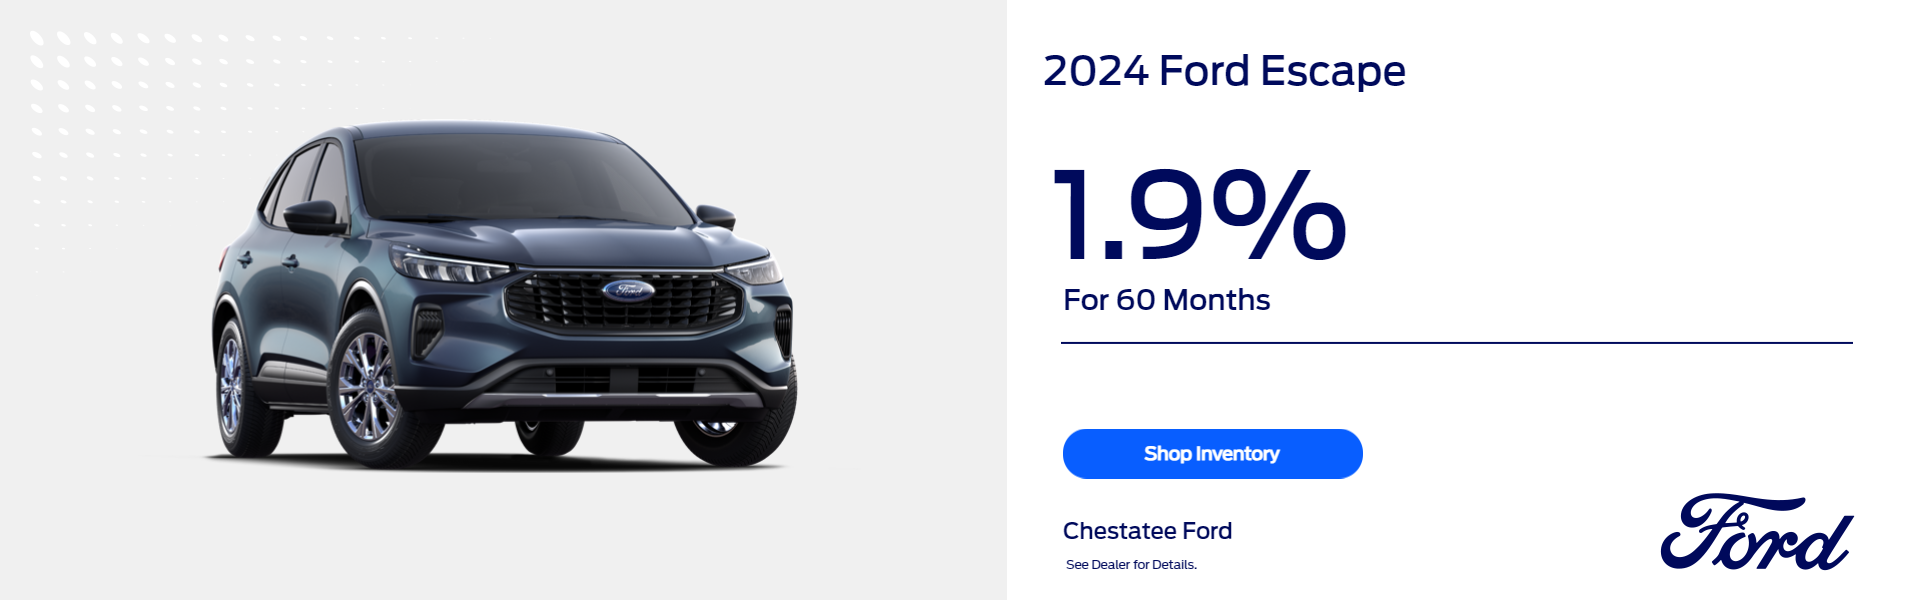 1.9% for 60 months Ford Escape